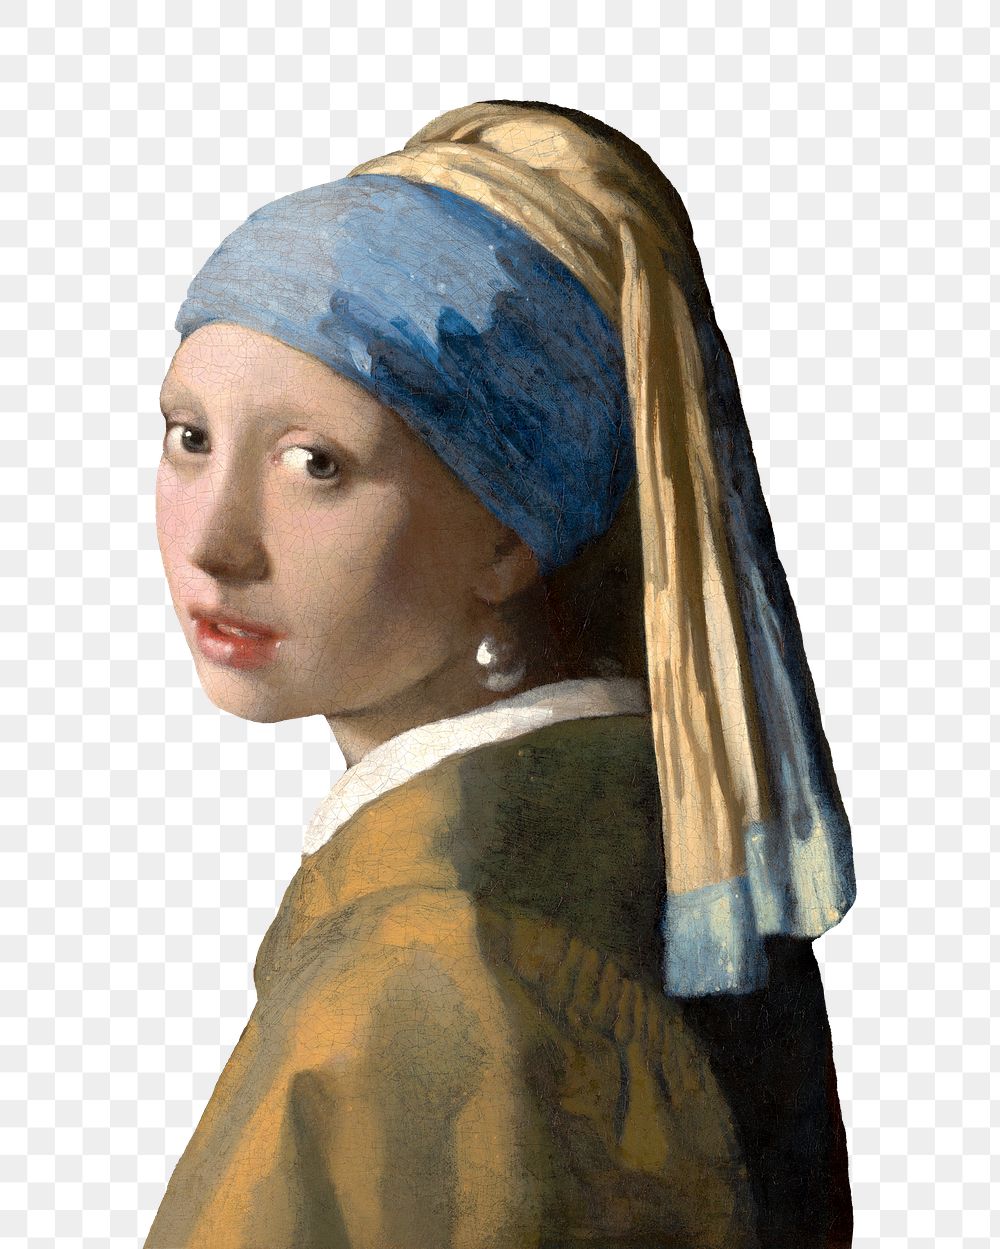 Png Girl with a Pearl Earring sticker, Johannes Vermeer's famous artwork on transparent background, remastered by rawpixel